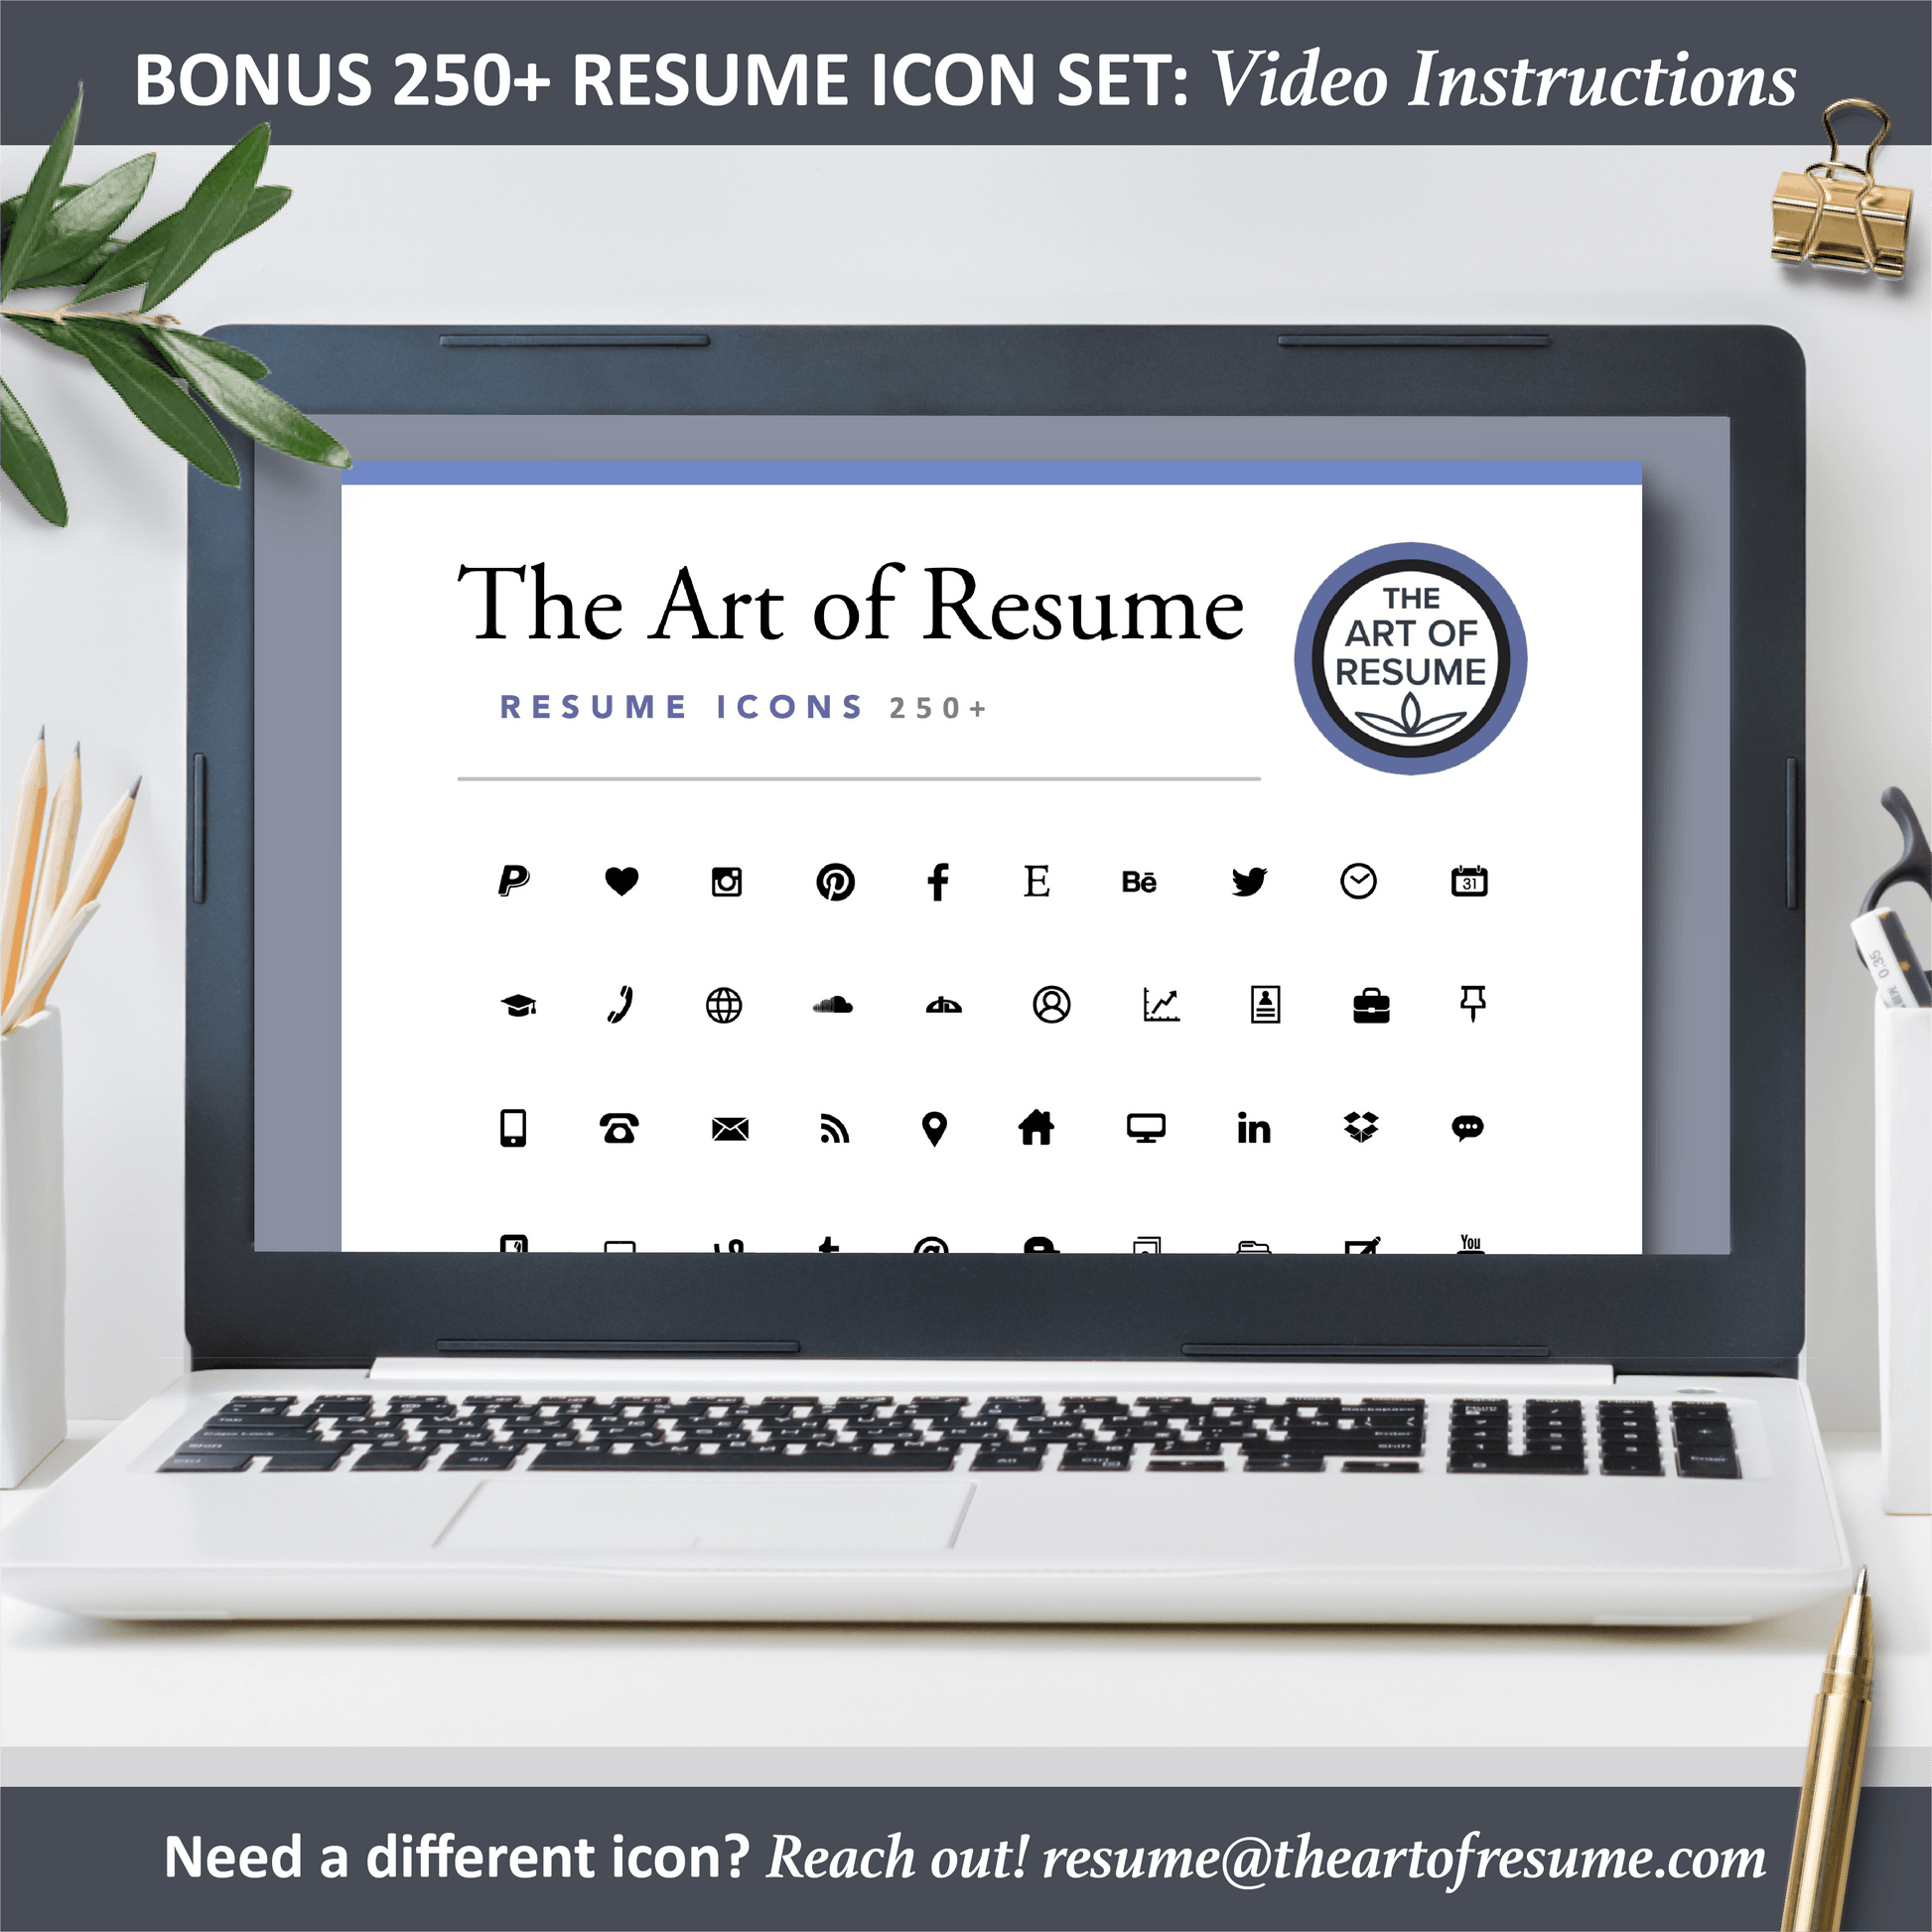 ATS Resume Template Builder | IT Resume with Cover Letter (Executive) - The Art of Resume